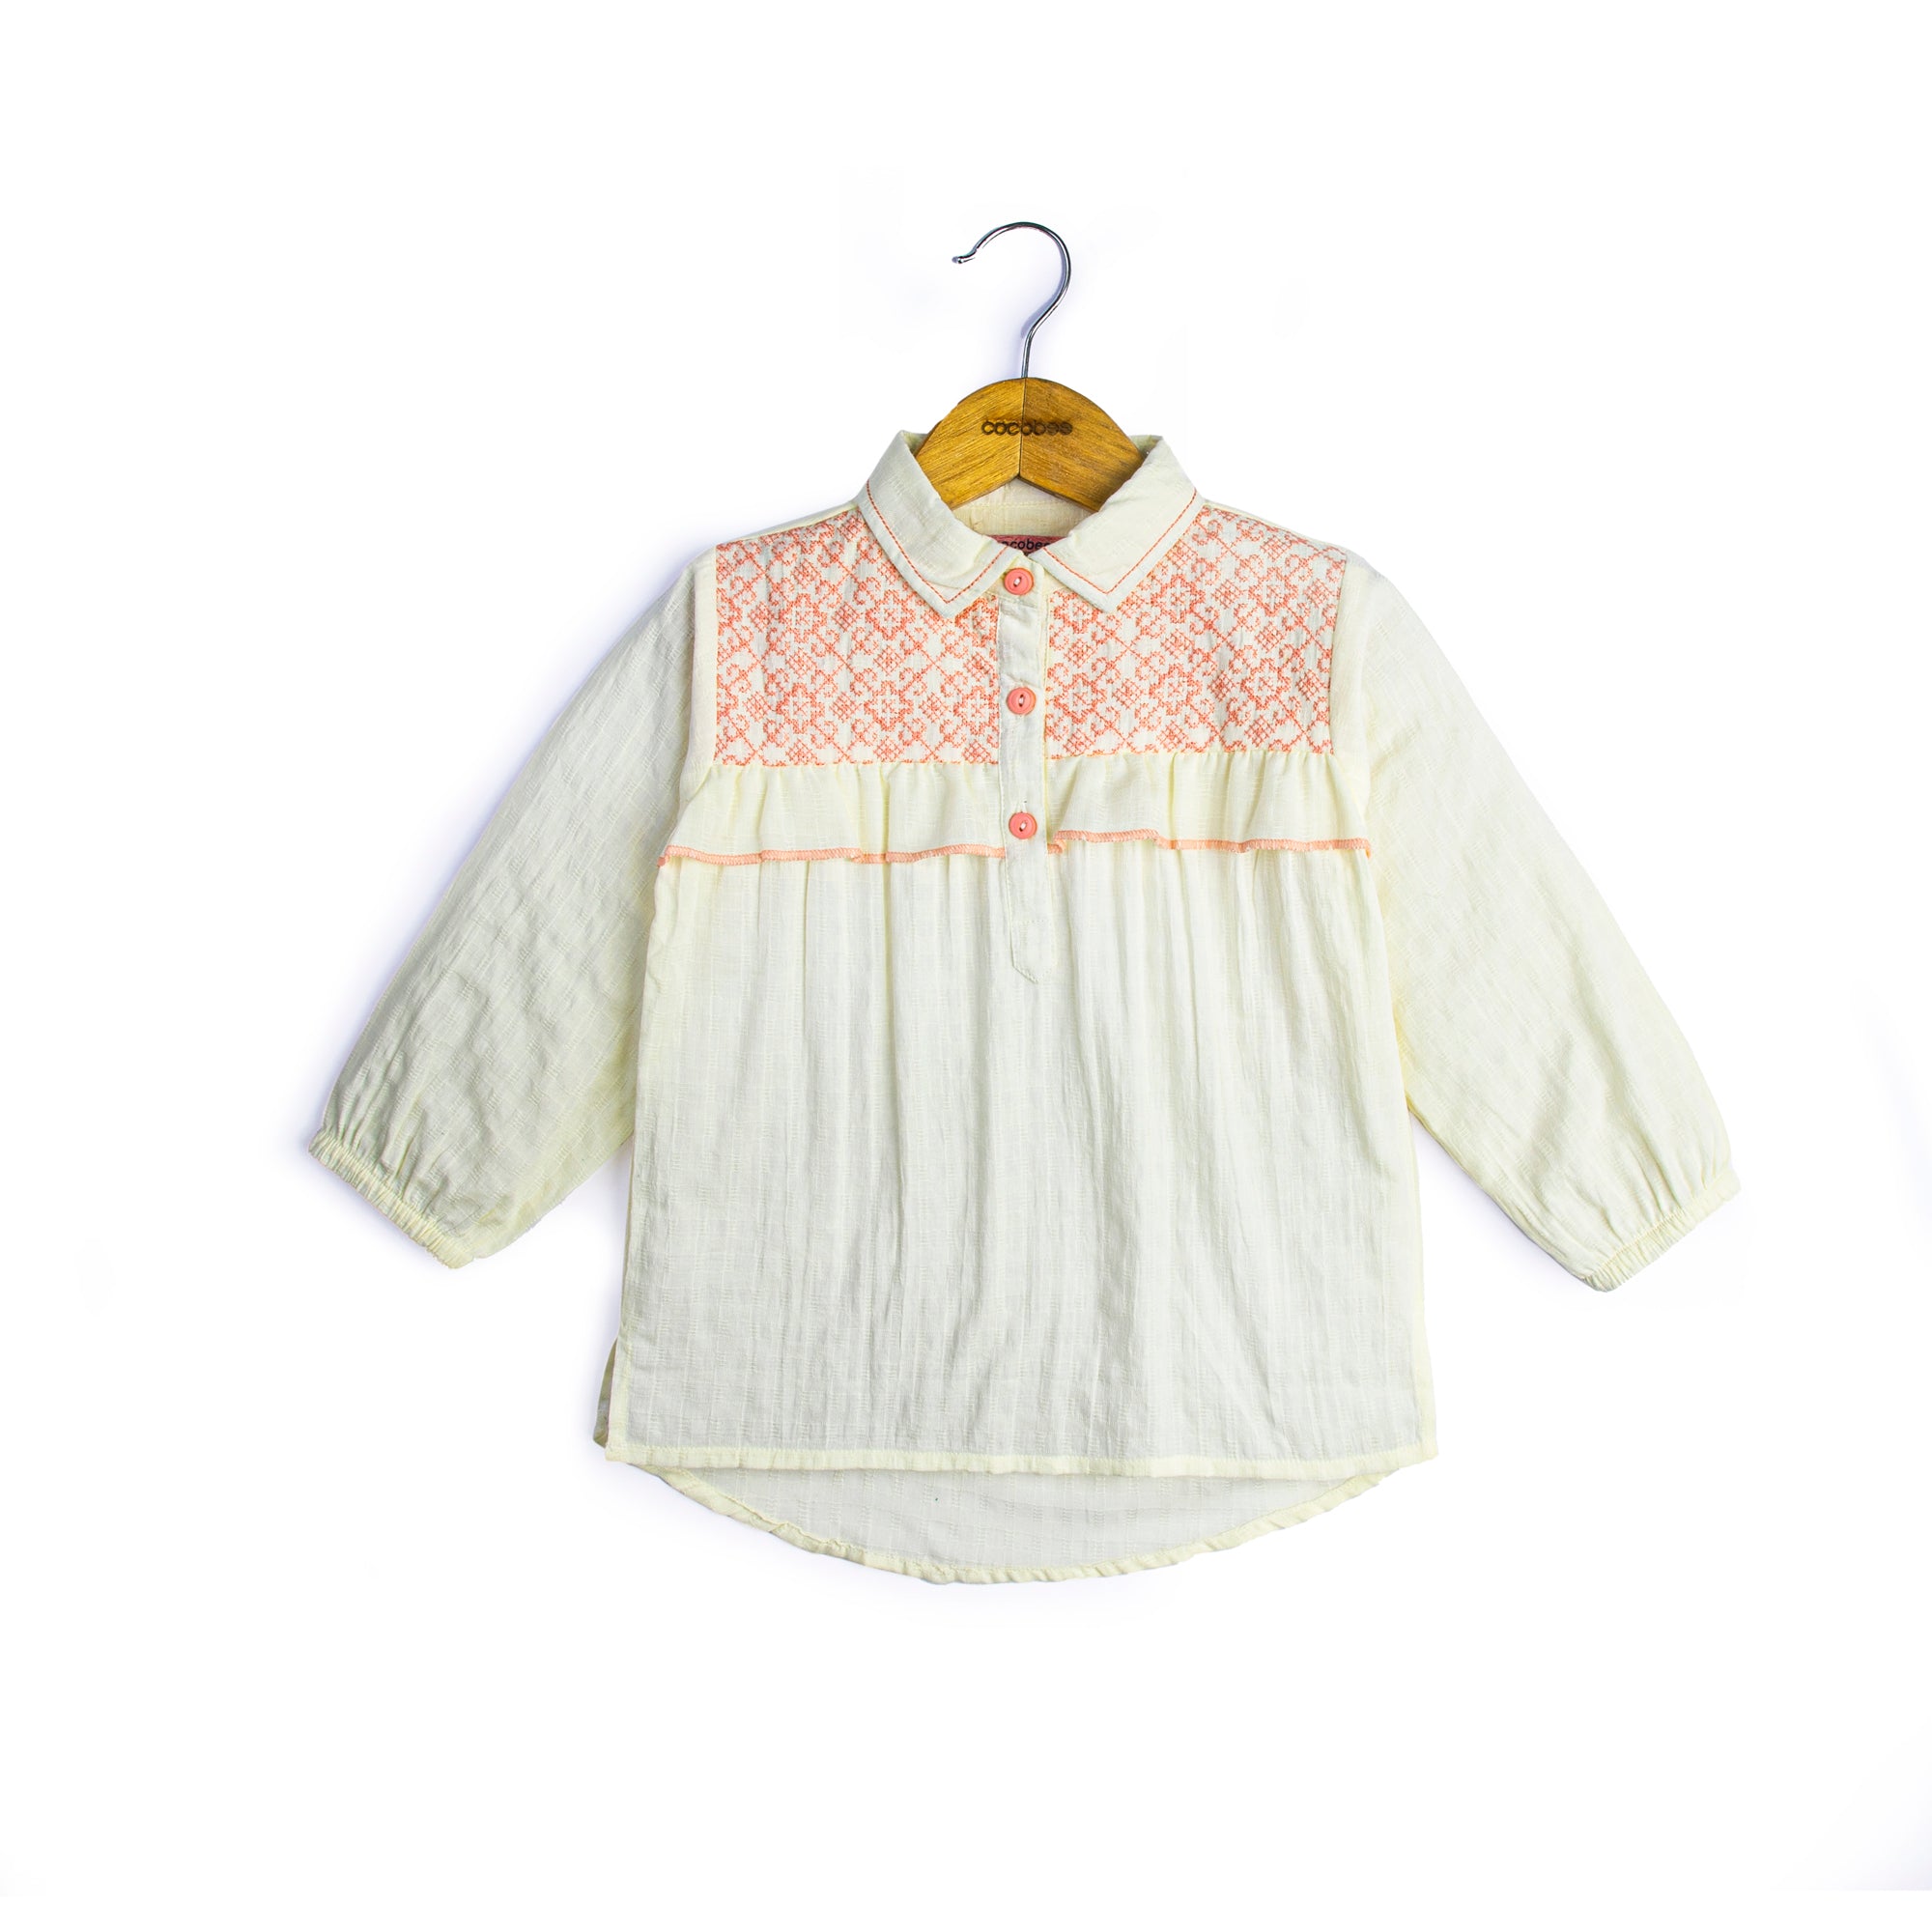 Embroidered Collared Top